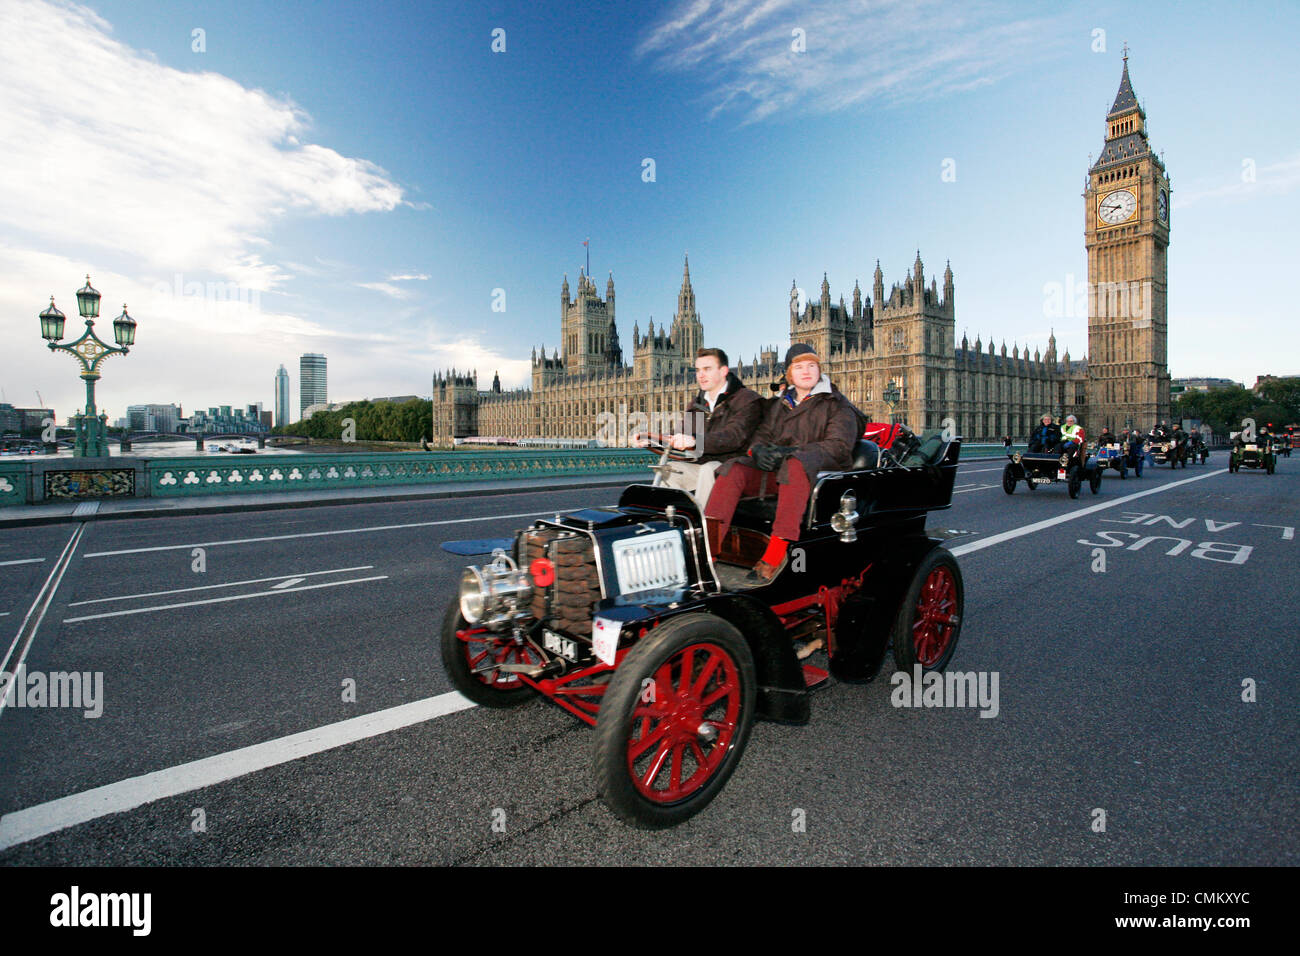 London, UK. 3rd November 2013. London to Brighton Veteran Car Run participants passing Westminster Bridge, Big Ben in the background, event starts at 7:00am at the Serpentine Road in Hyde Park, London. © SUNG KUK KIM/Alamy Live News Stock Photo